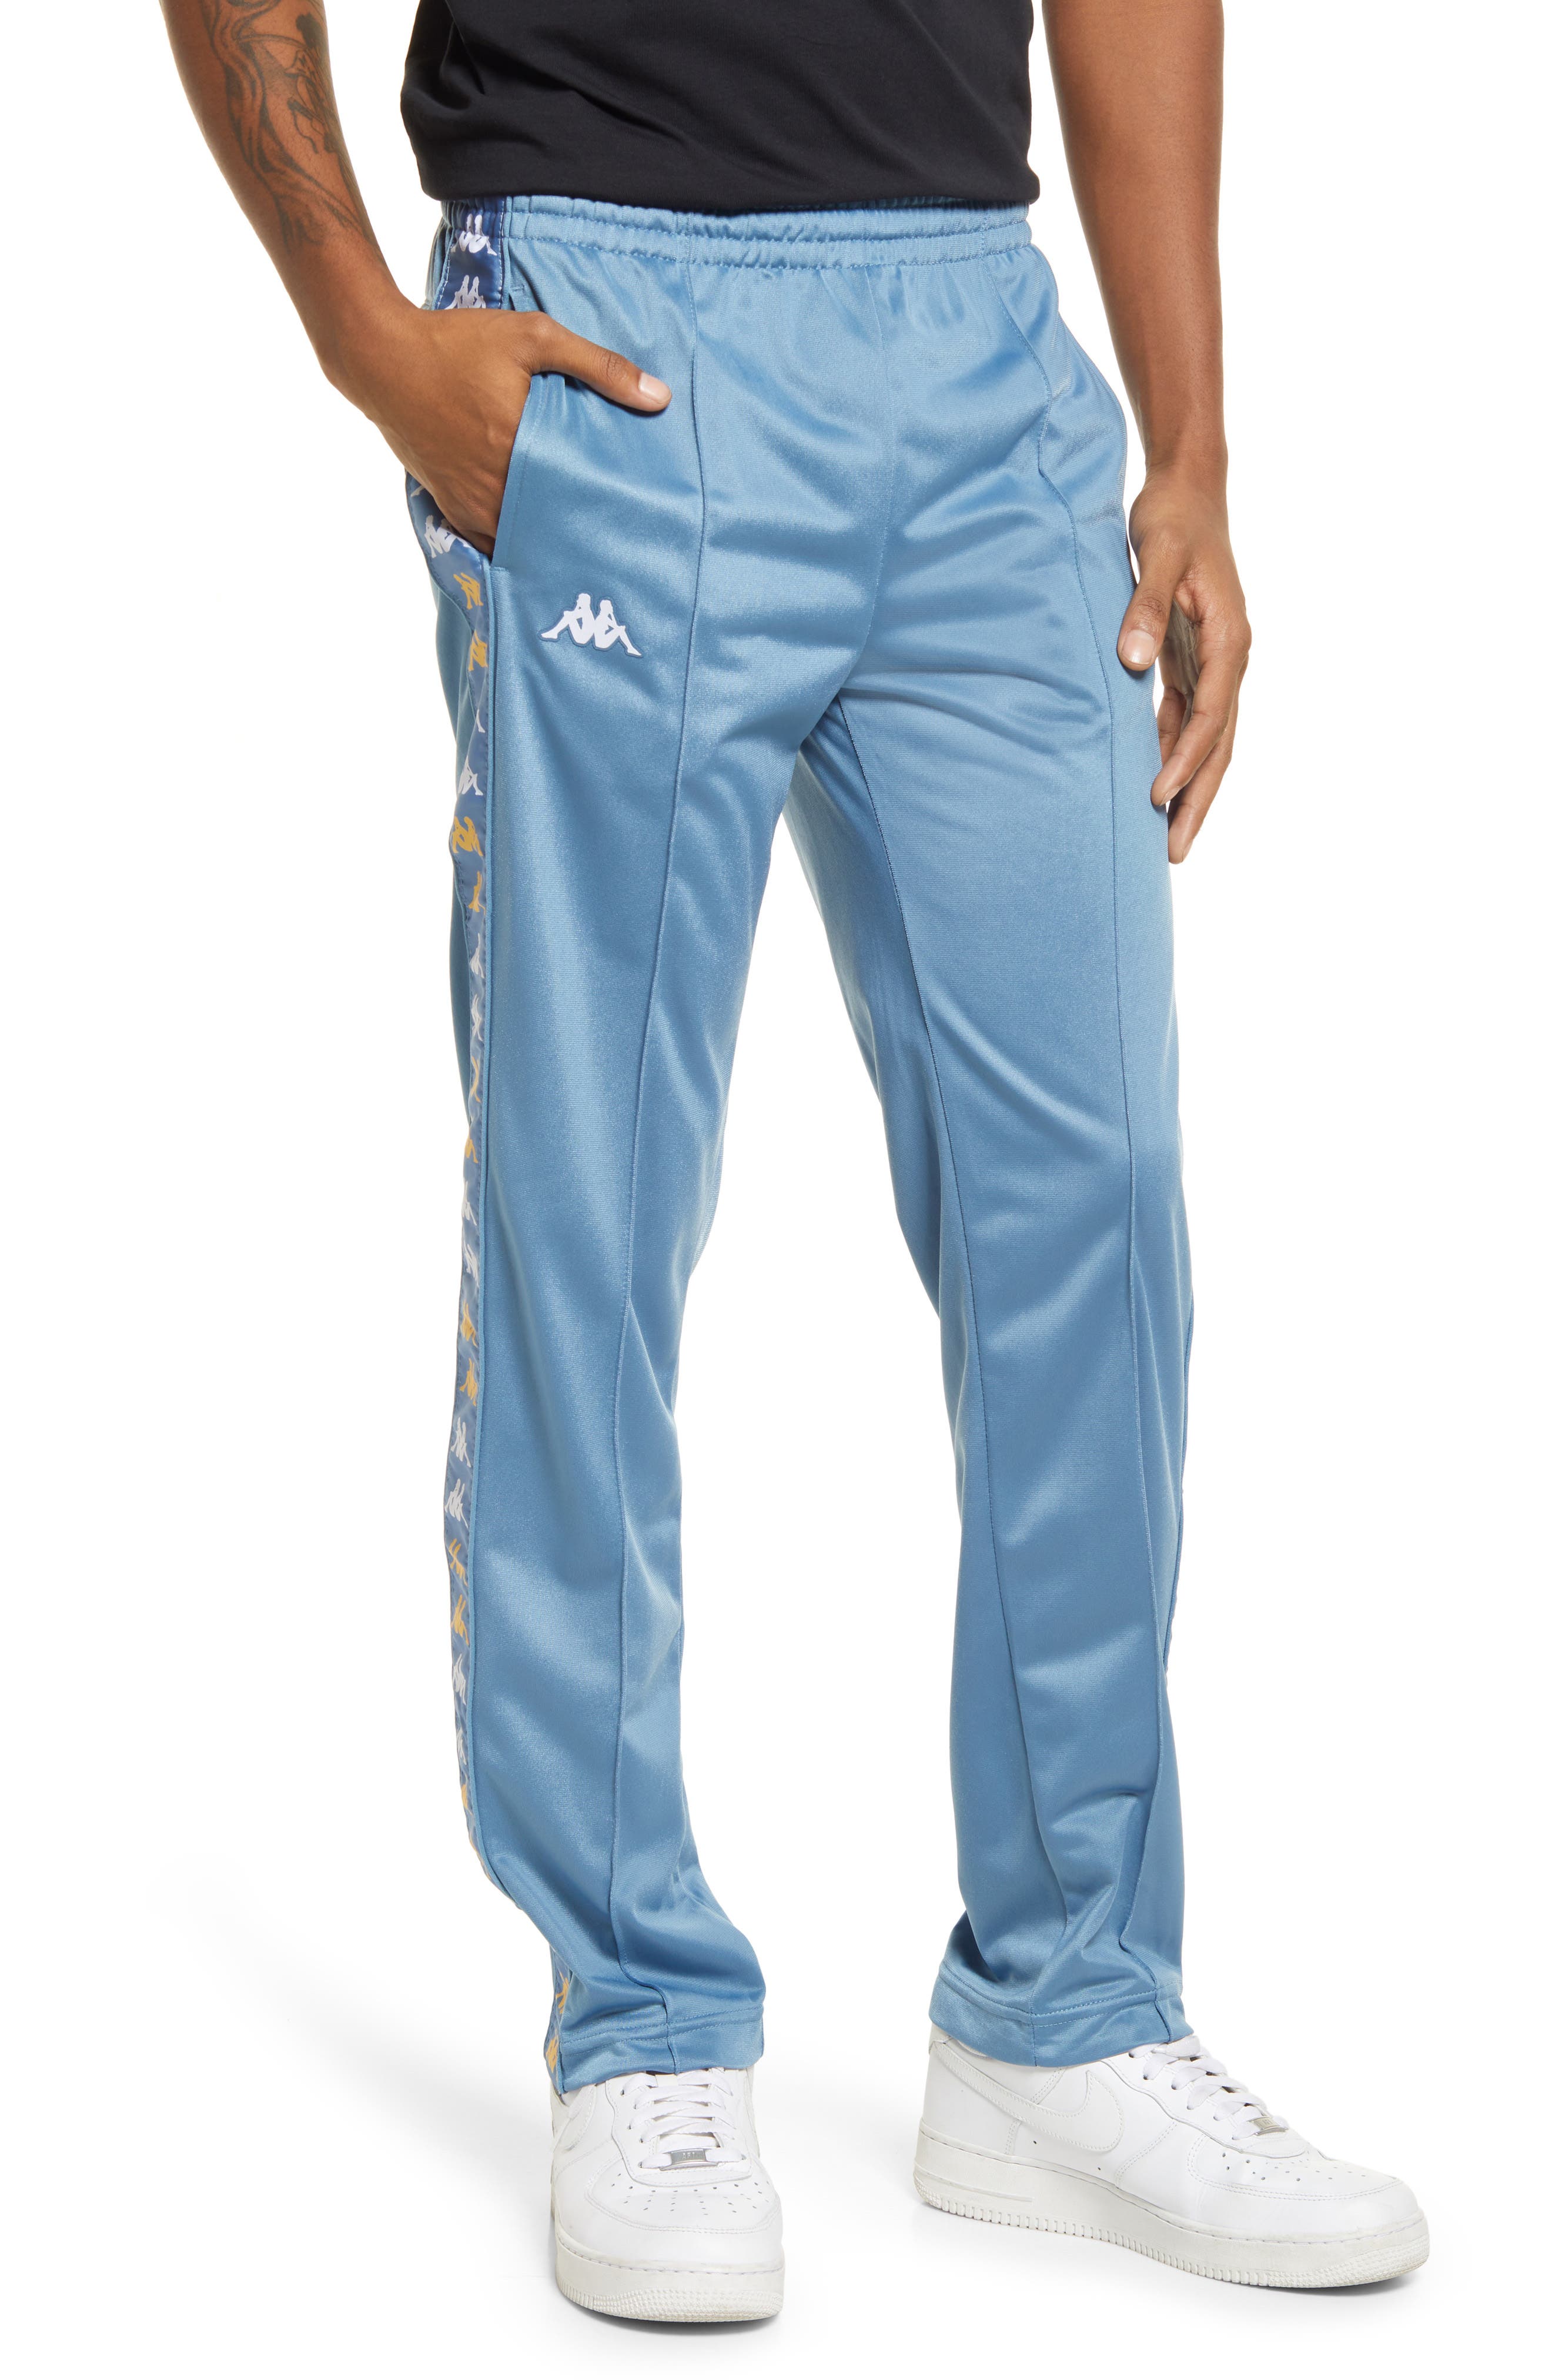 Kappa Men's 222 Banda Astoriazzin Track Pants in Blue Steel-Yellow-Bright White at Nordstrom, Size Large